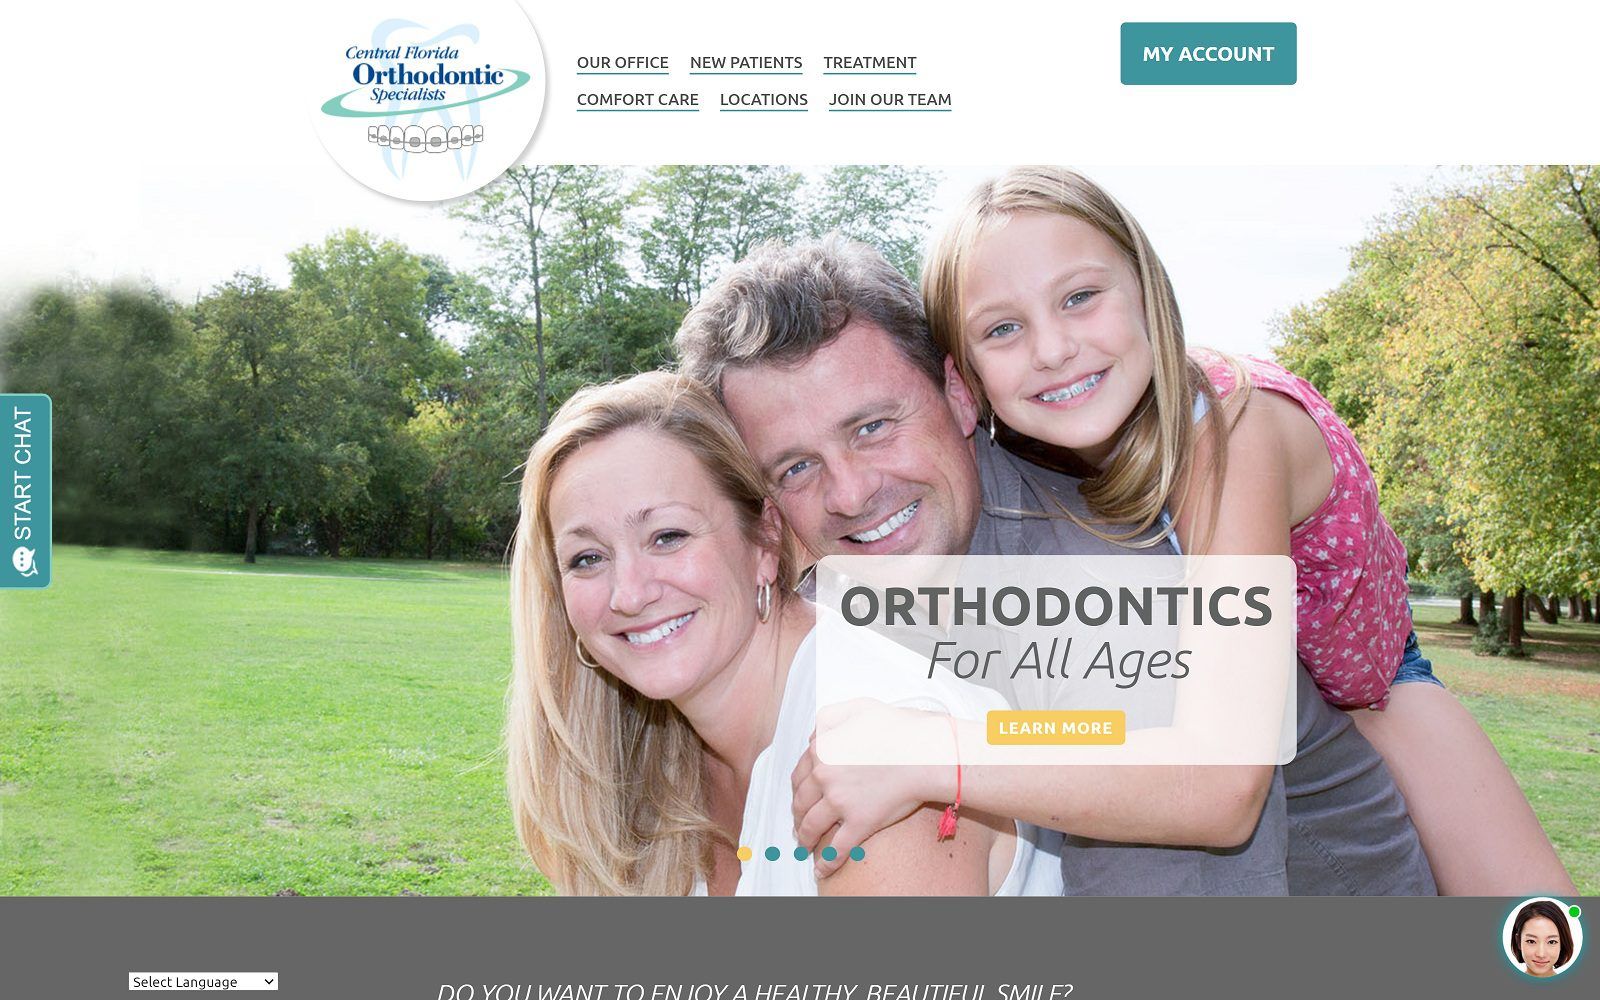 The screenshot of central florida orthodontic specialists website